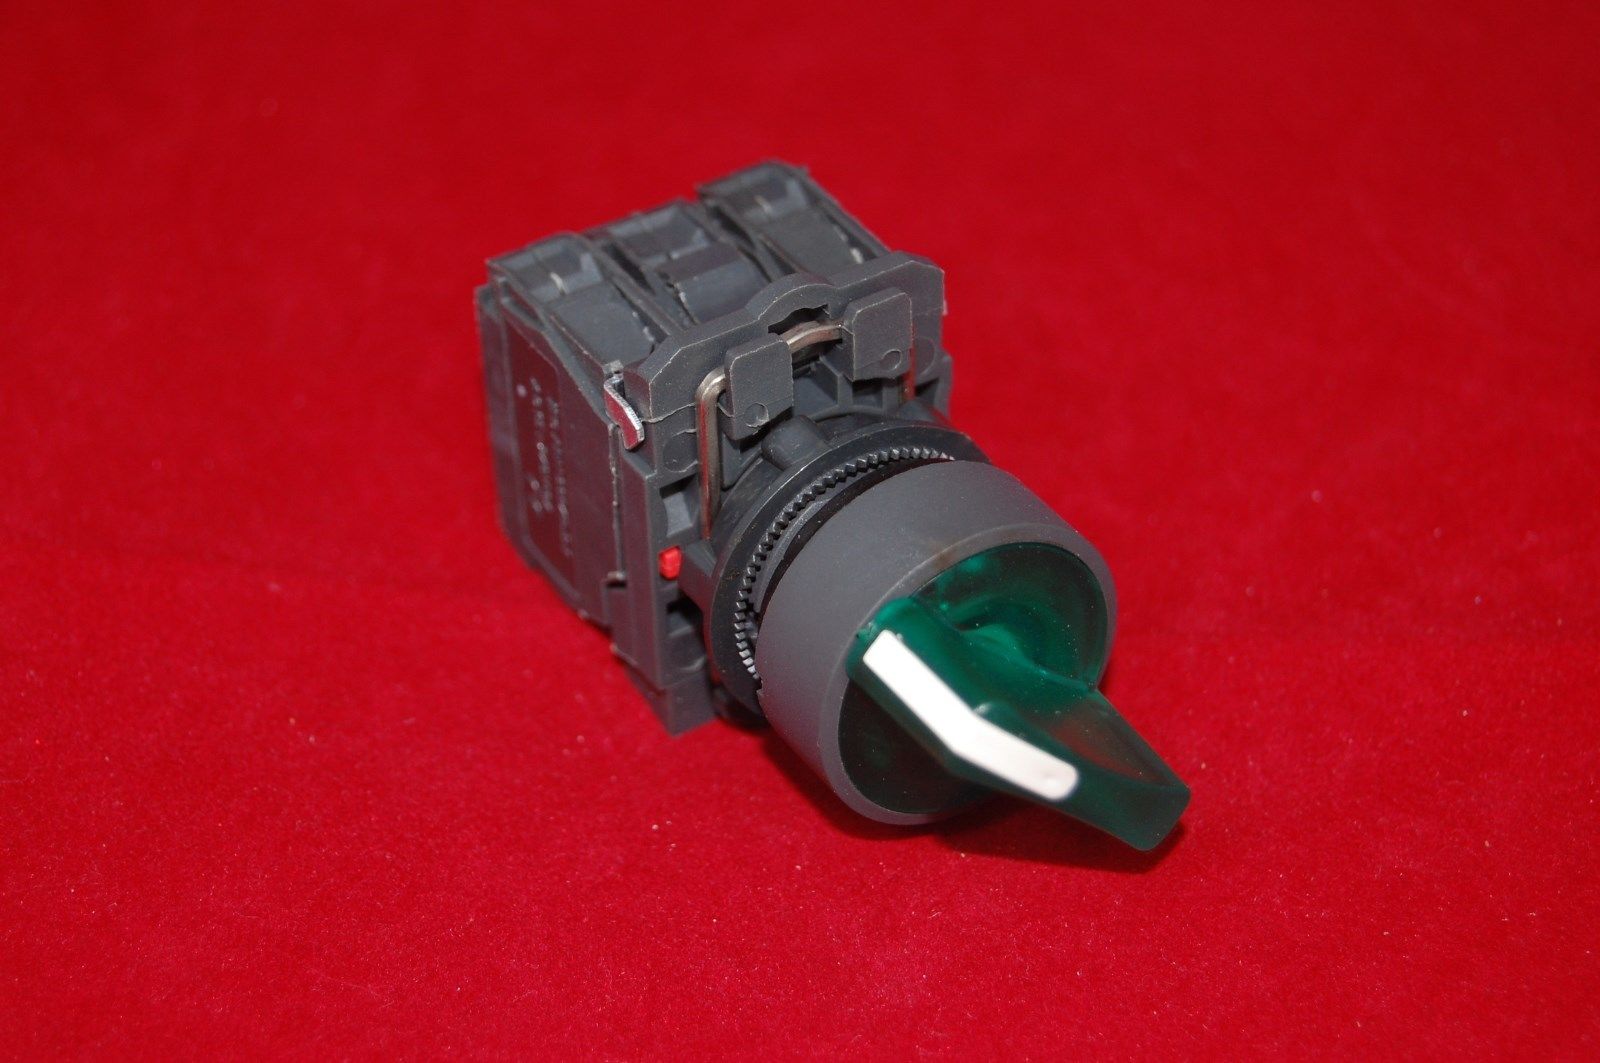 22mm ILLUMINATED Selector switch 2 Position Fits Green XB5AK123G5 120V Maintain